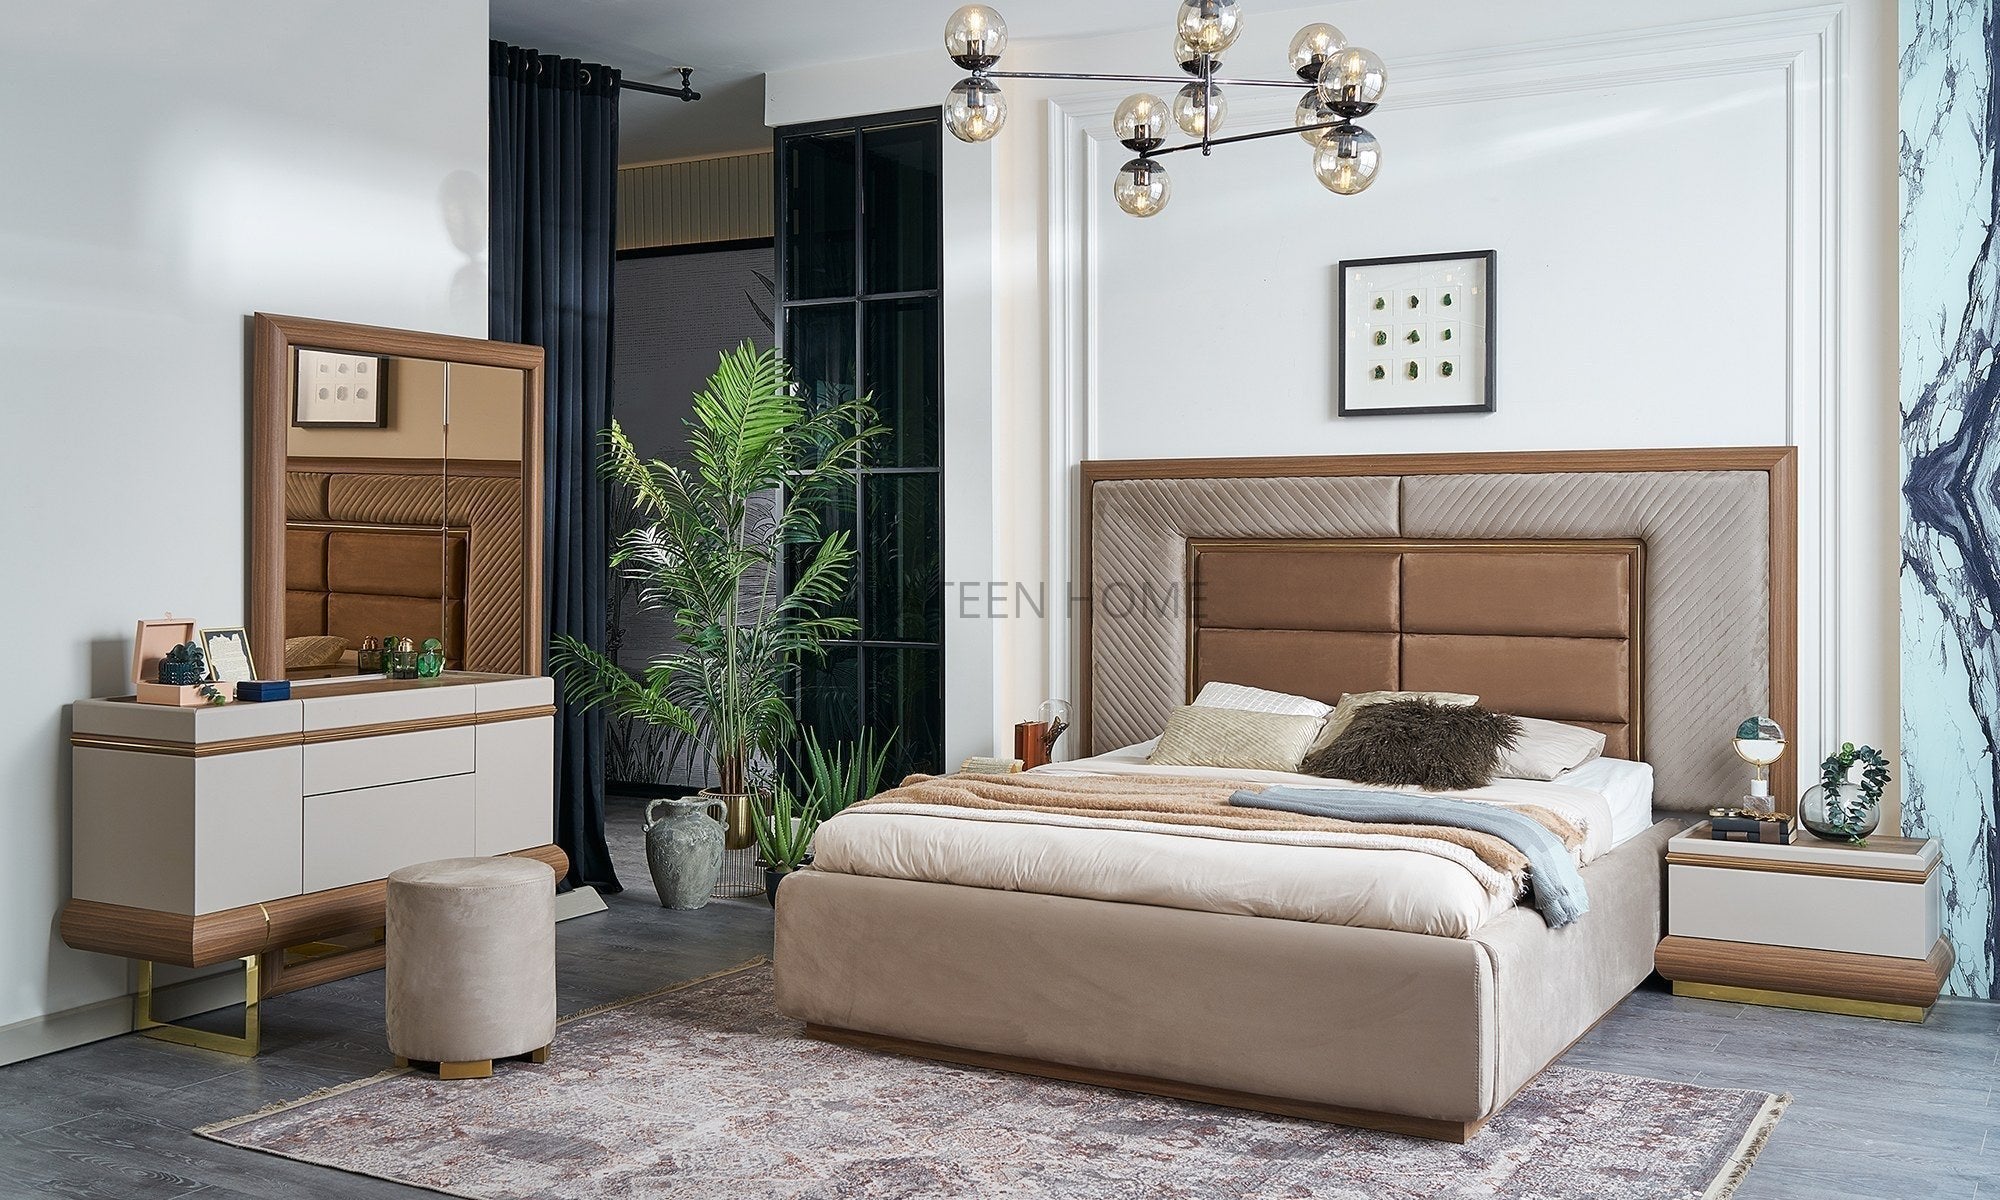 turkish-maya-bedroom-set-with-king-size-bed-dresser-wardrobe-and-side-tables-6- AL-Mateen Home